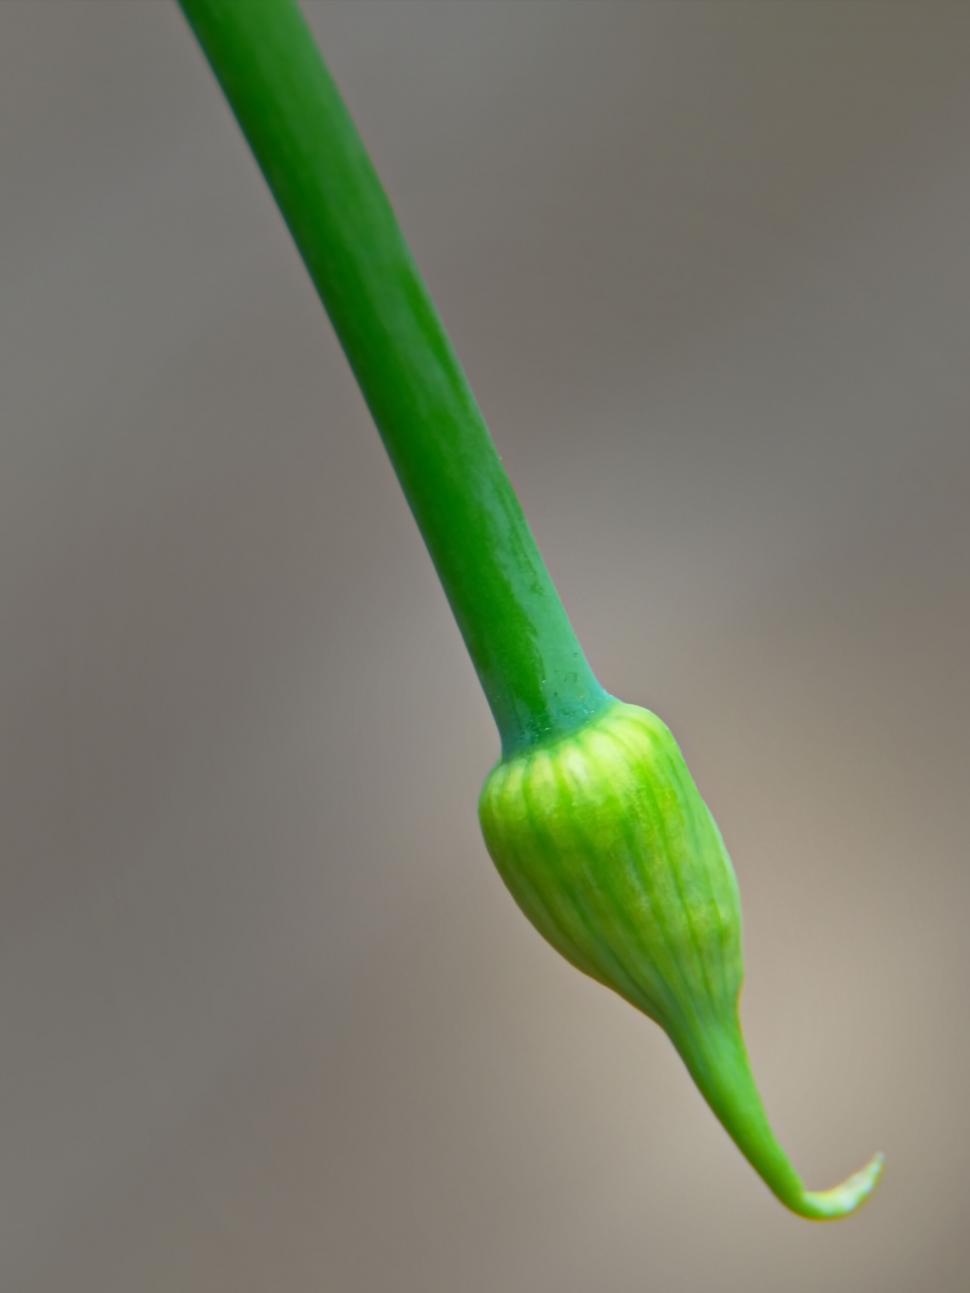 Free Image of Single green stem with a budding flower 